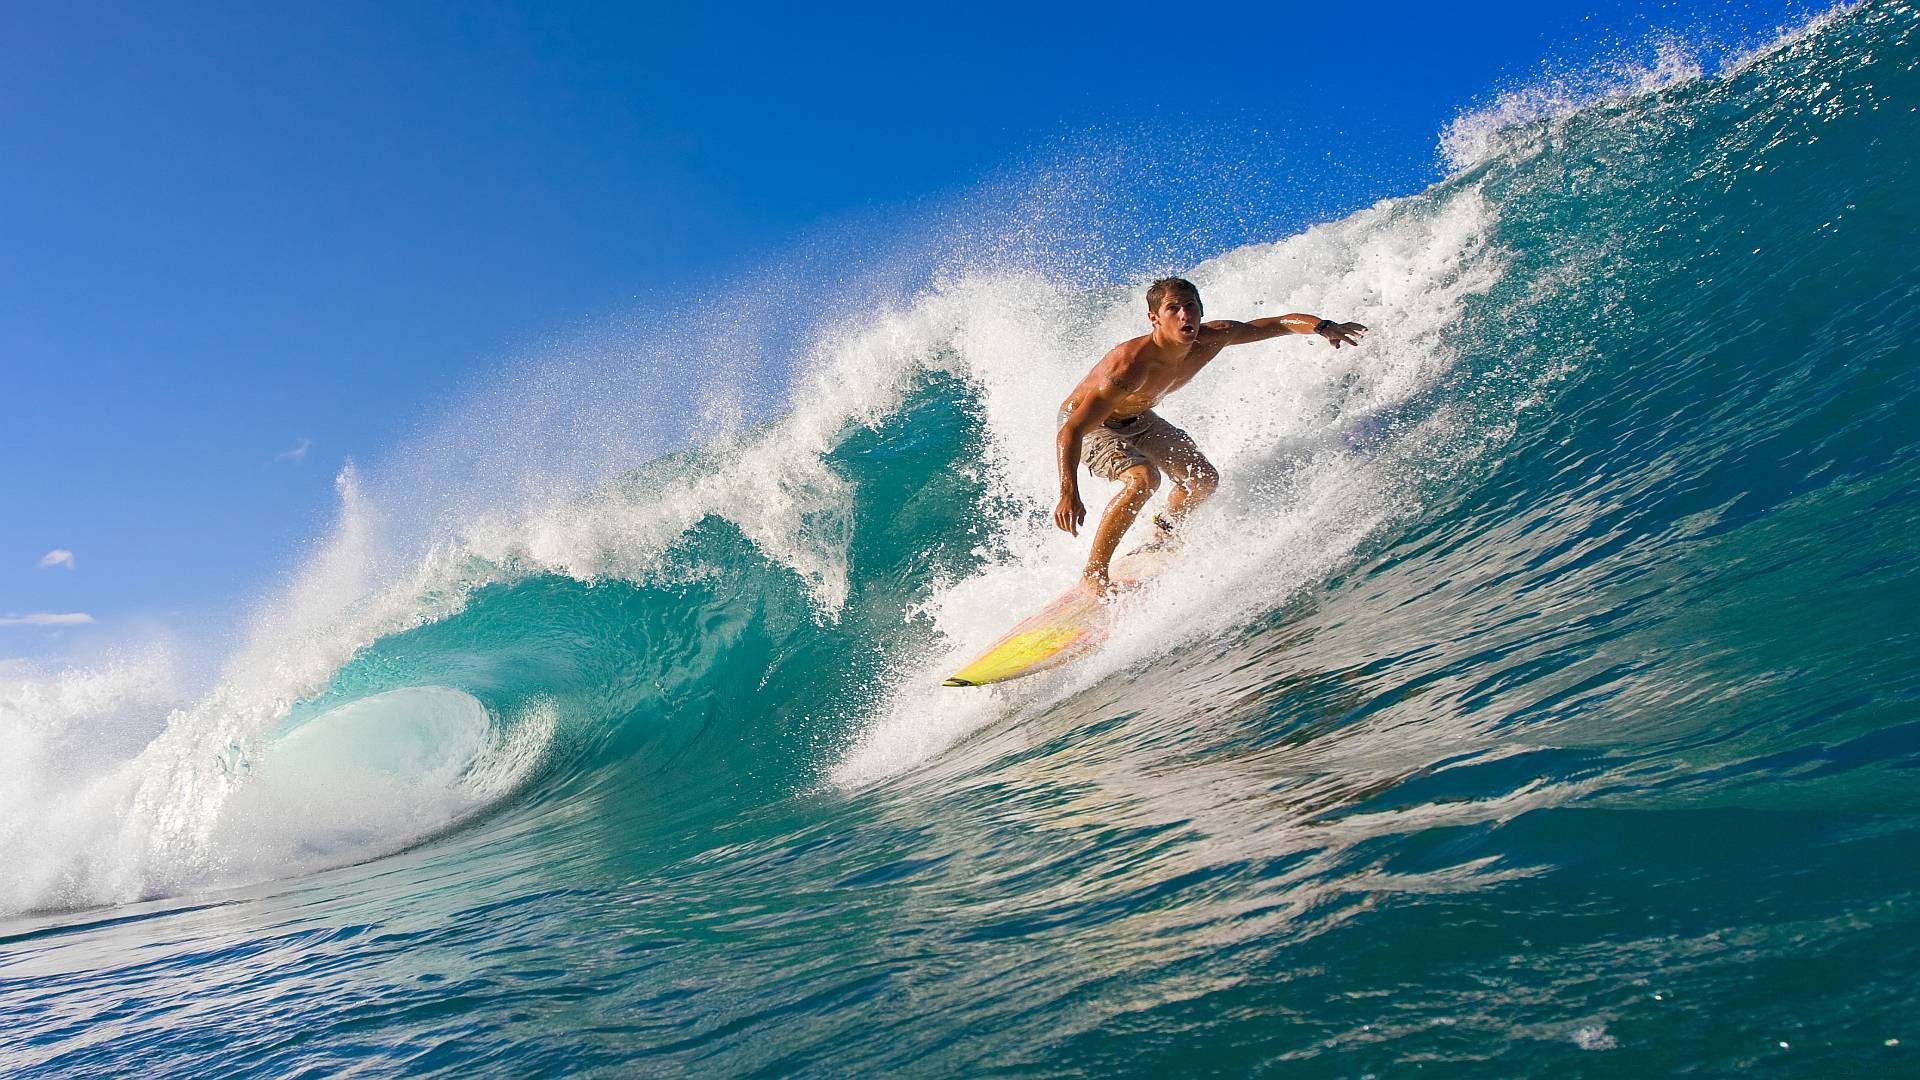 1920x1080 surfing pictures desktop - surfing category